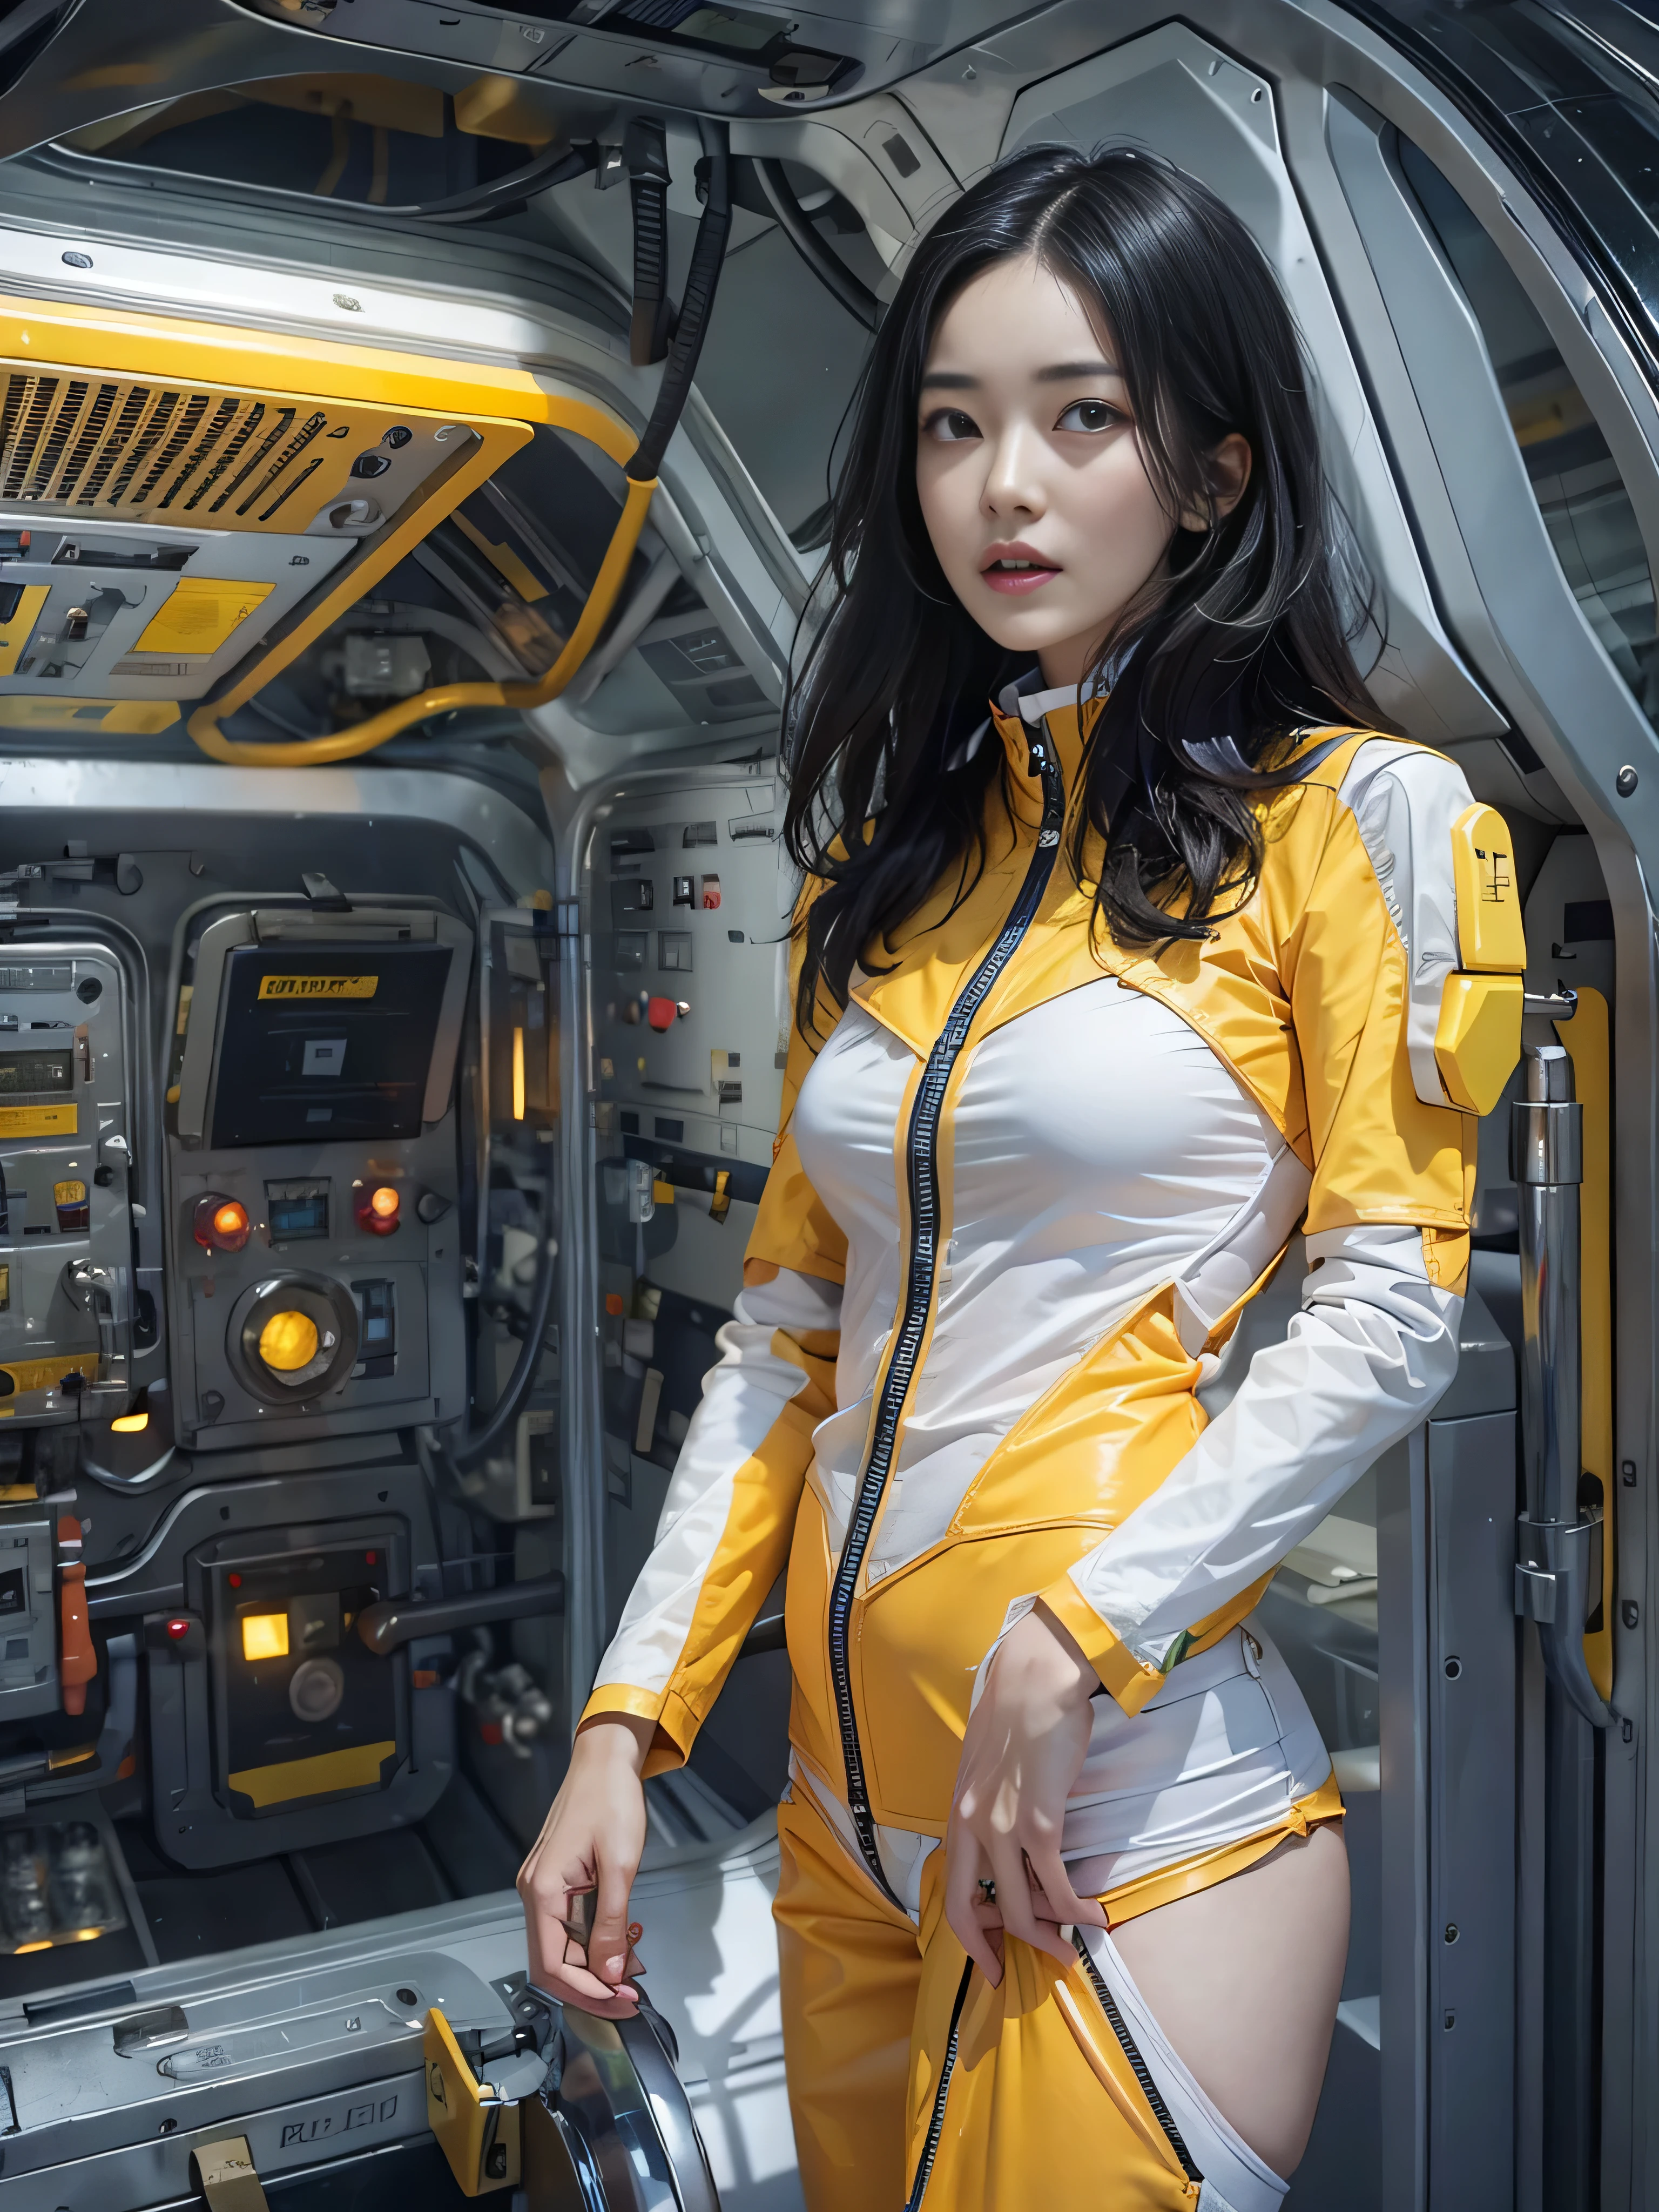 (Raw quality:1.4), Beautiful slim and long legged woman、Beautiful and well-groomed face、Long black hair、Smooth legs、Well-balanced and slim body、Full Body Lesbian、no gravity、He&#39;s changing into a skin-tight yellow space suit.、Cleavage, Black lace underwear, Inside the space station、mechanical、　White lighting